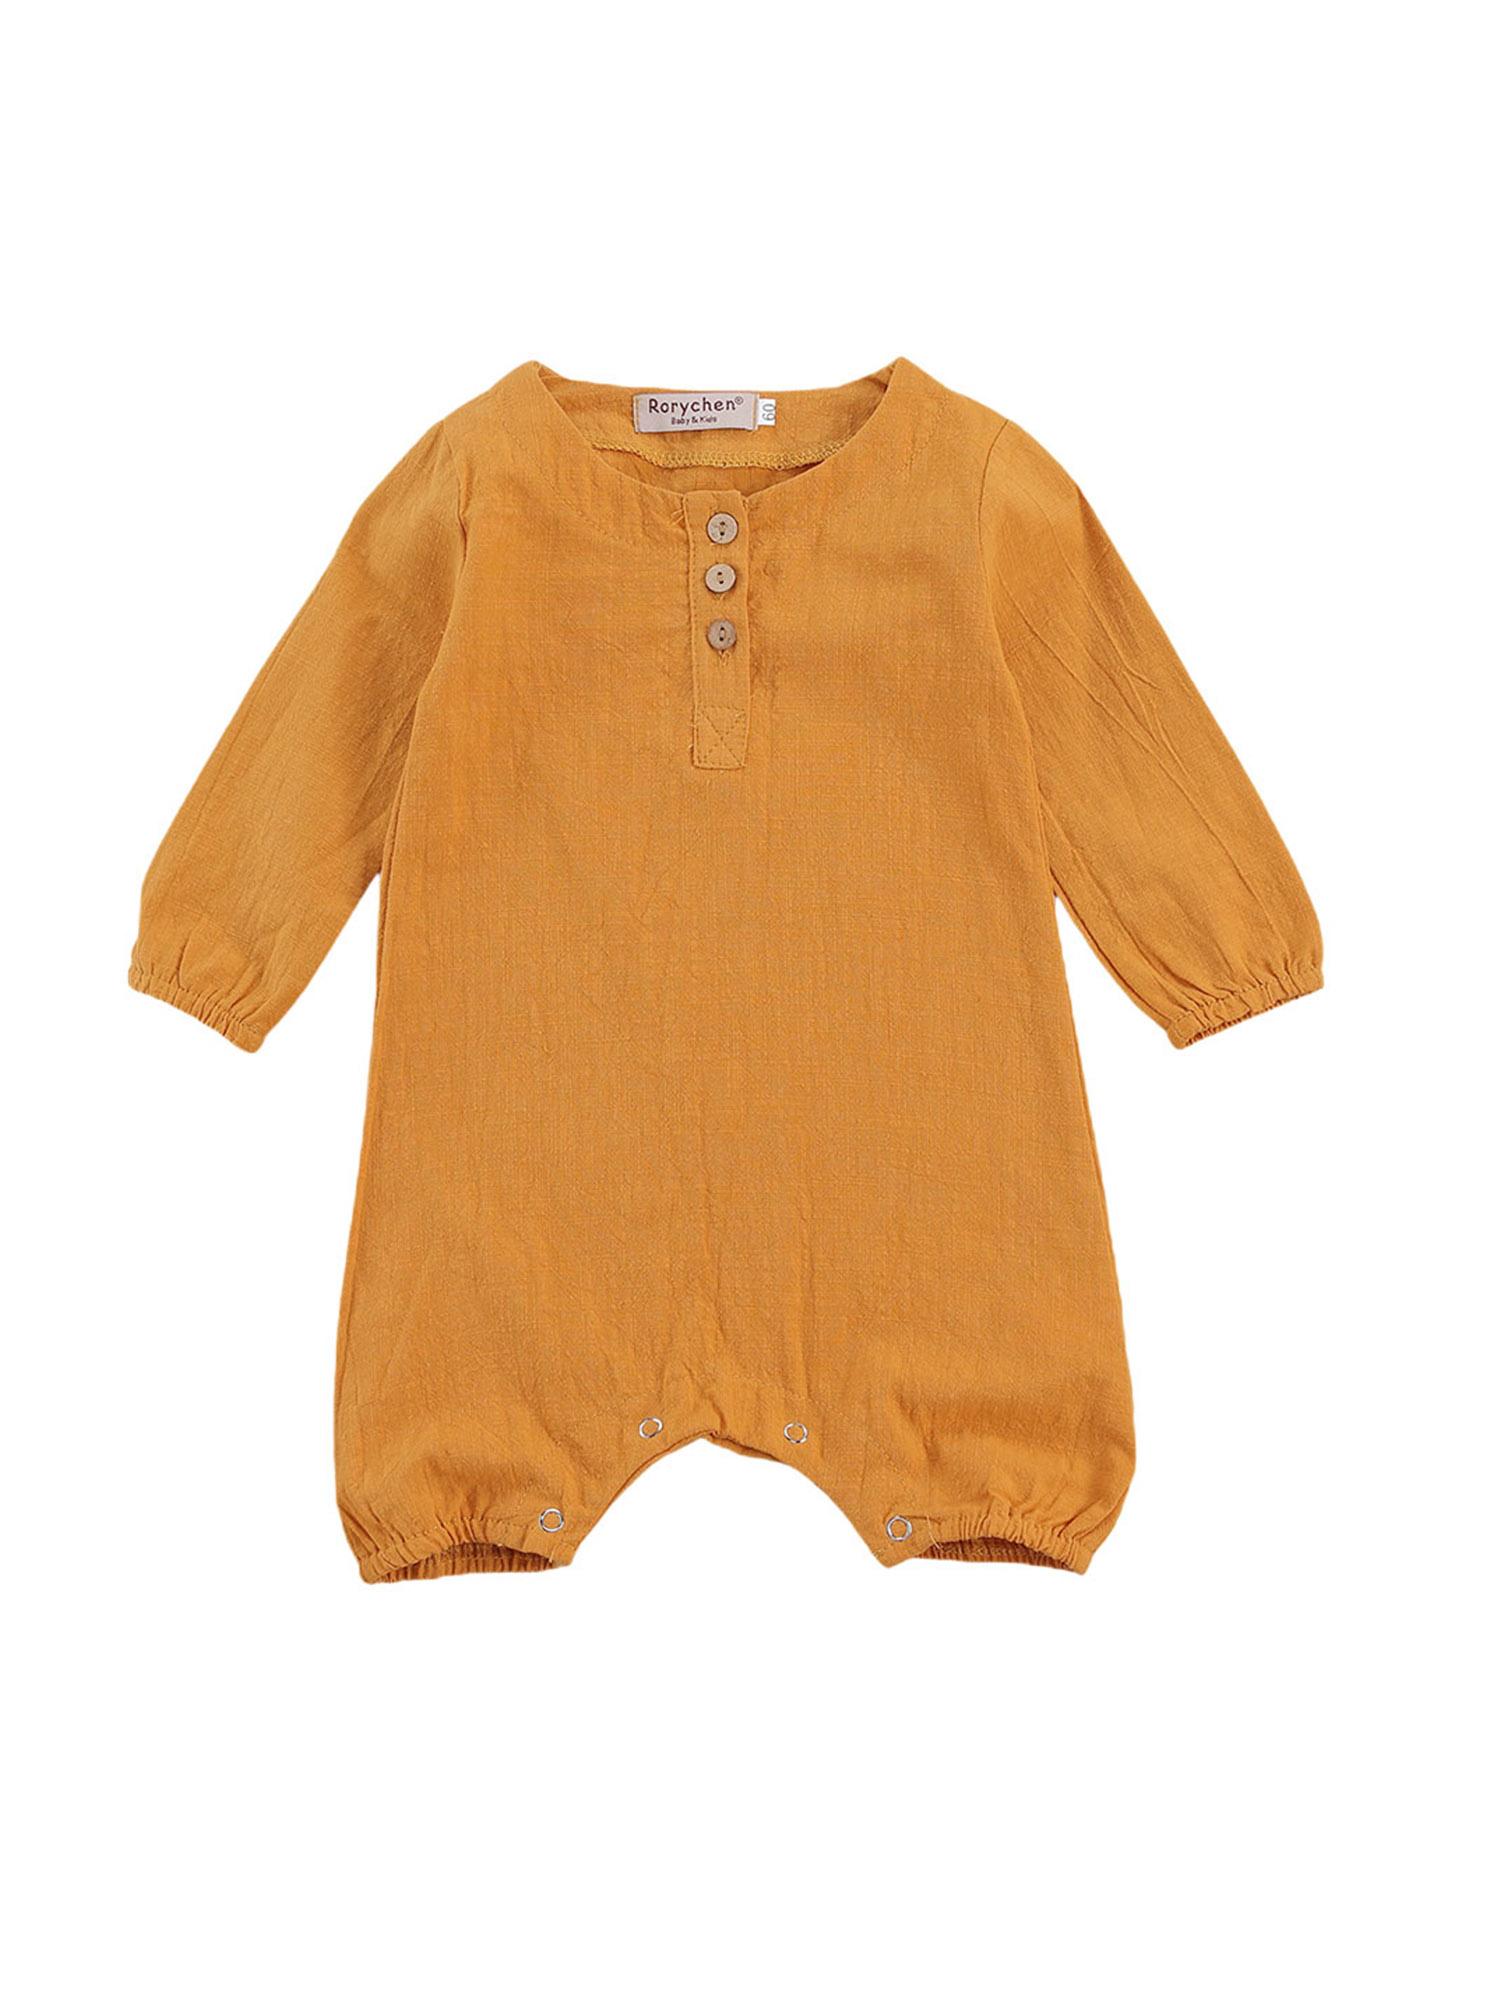 Изображение товара: Infants Baby Romper Spring Fall Solid Color Long Sleeve Crotch Buttons Jumpsuit Home Sports Sleeping Jogger Trousers